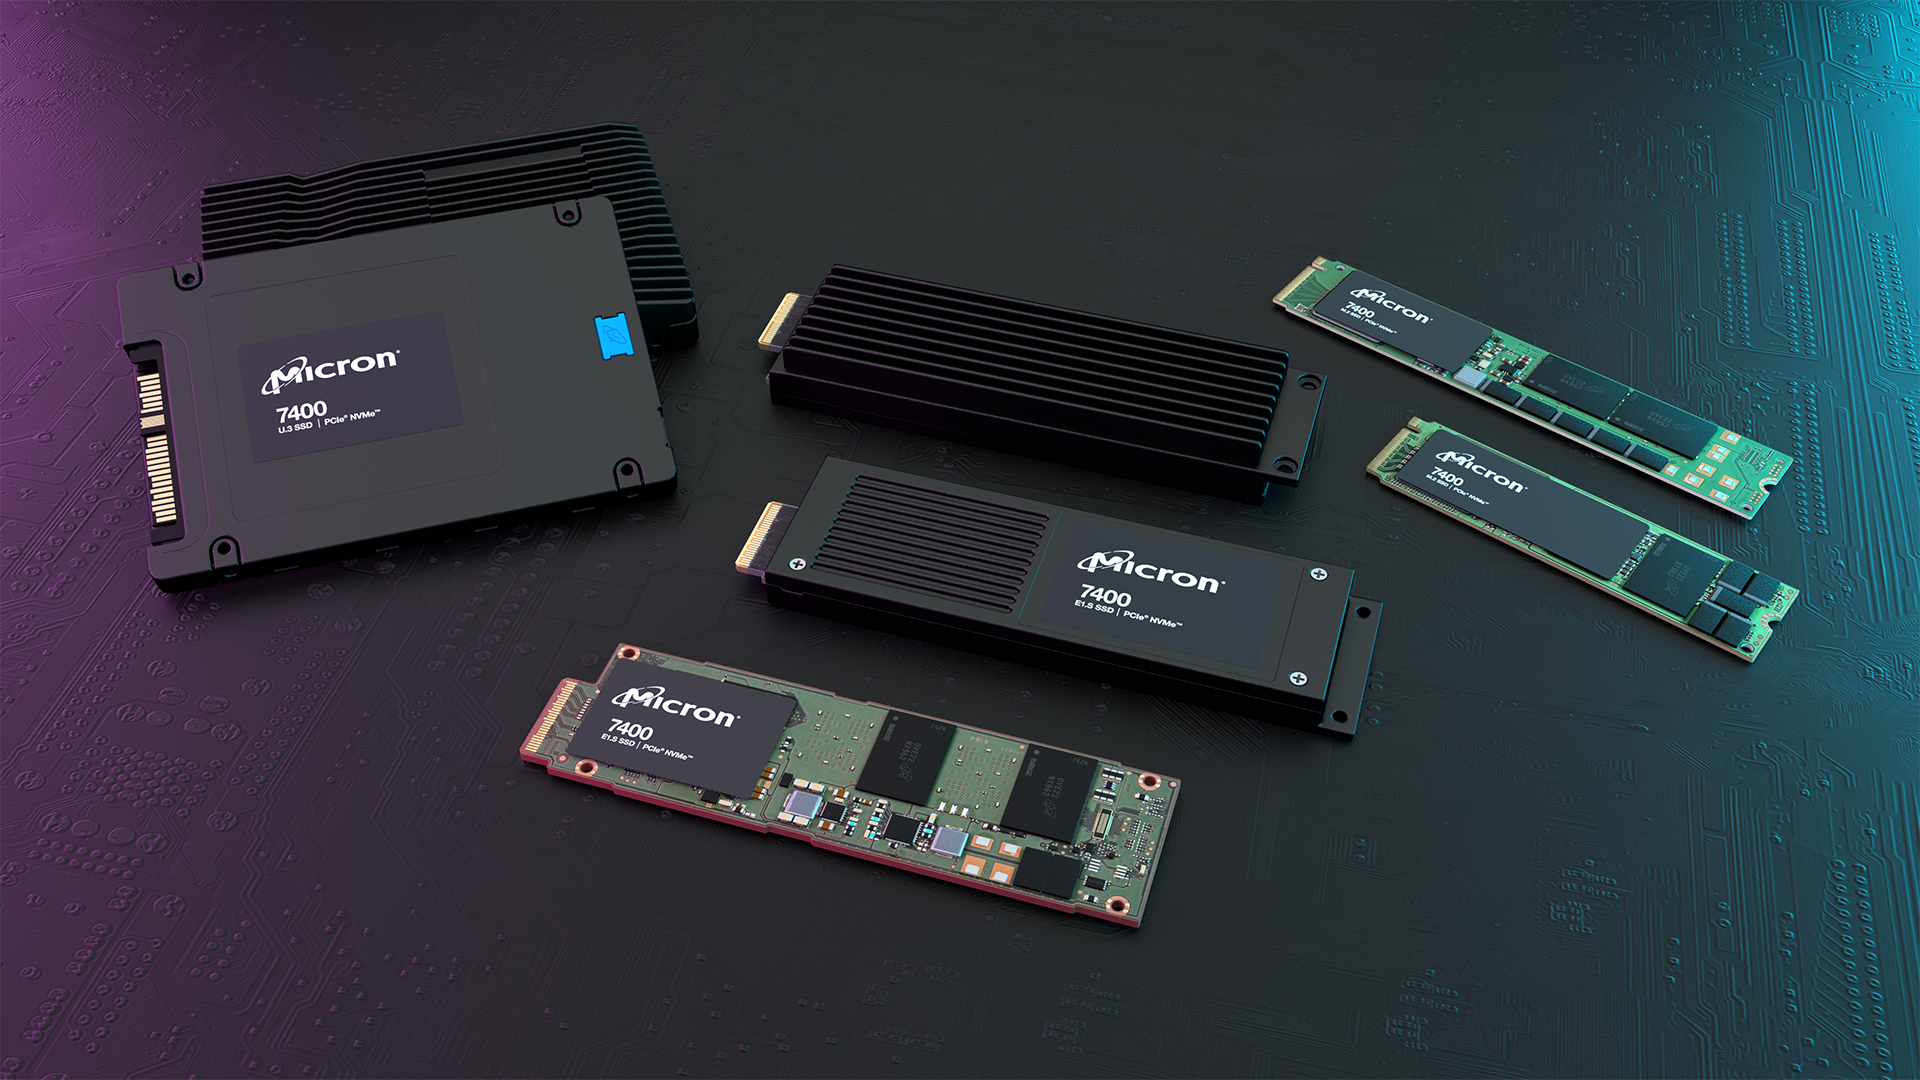 Micron® 7400 SSD With NVMe™ Delivers PCIe Gen4 Performance for 